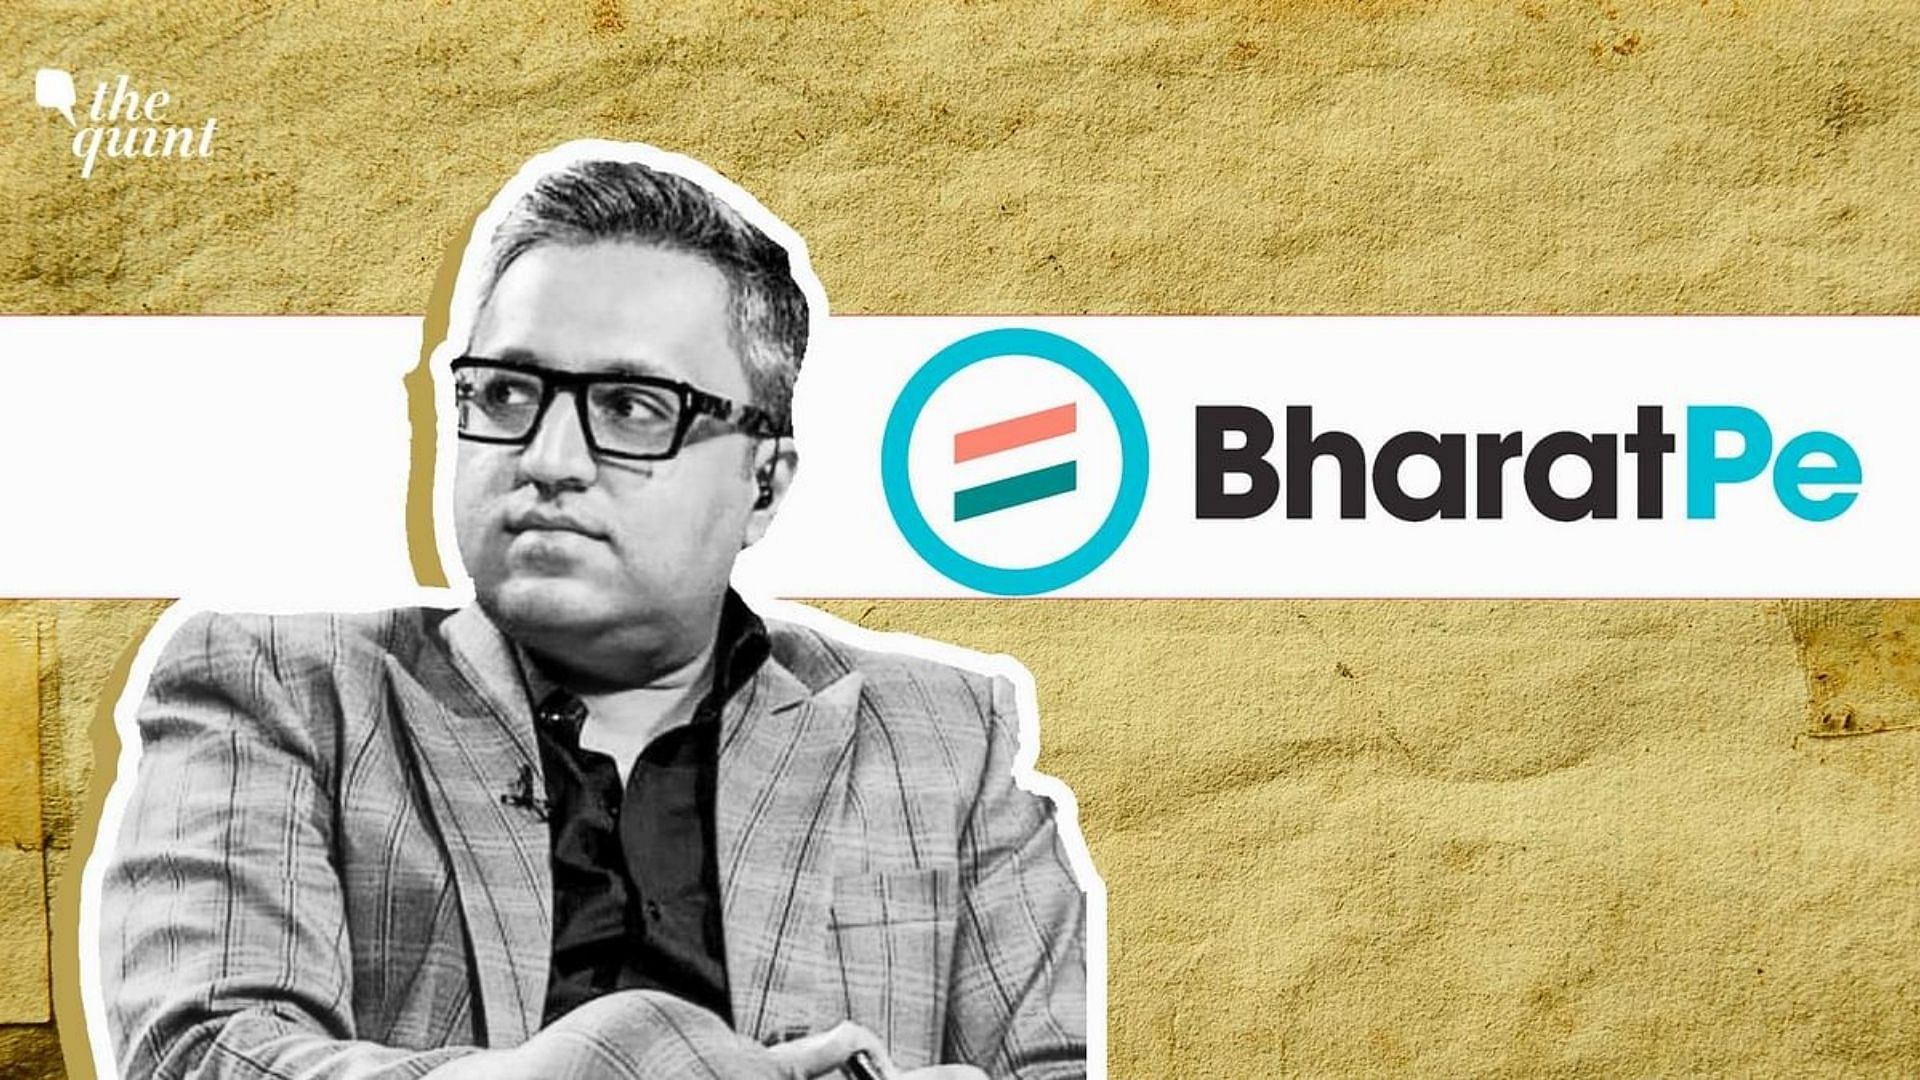 <div class="paragraphs"><p>Ashneer Grover, co-founder and Managing Director (MD) of BharatPe, on Monday, 28 February, <a href="https://www.thequint.com/news/india/ashneer-grover-resigns-as-bharatpe-md">resigned</a> from the fintech firm with immediate effect.</p></div>